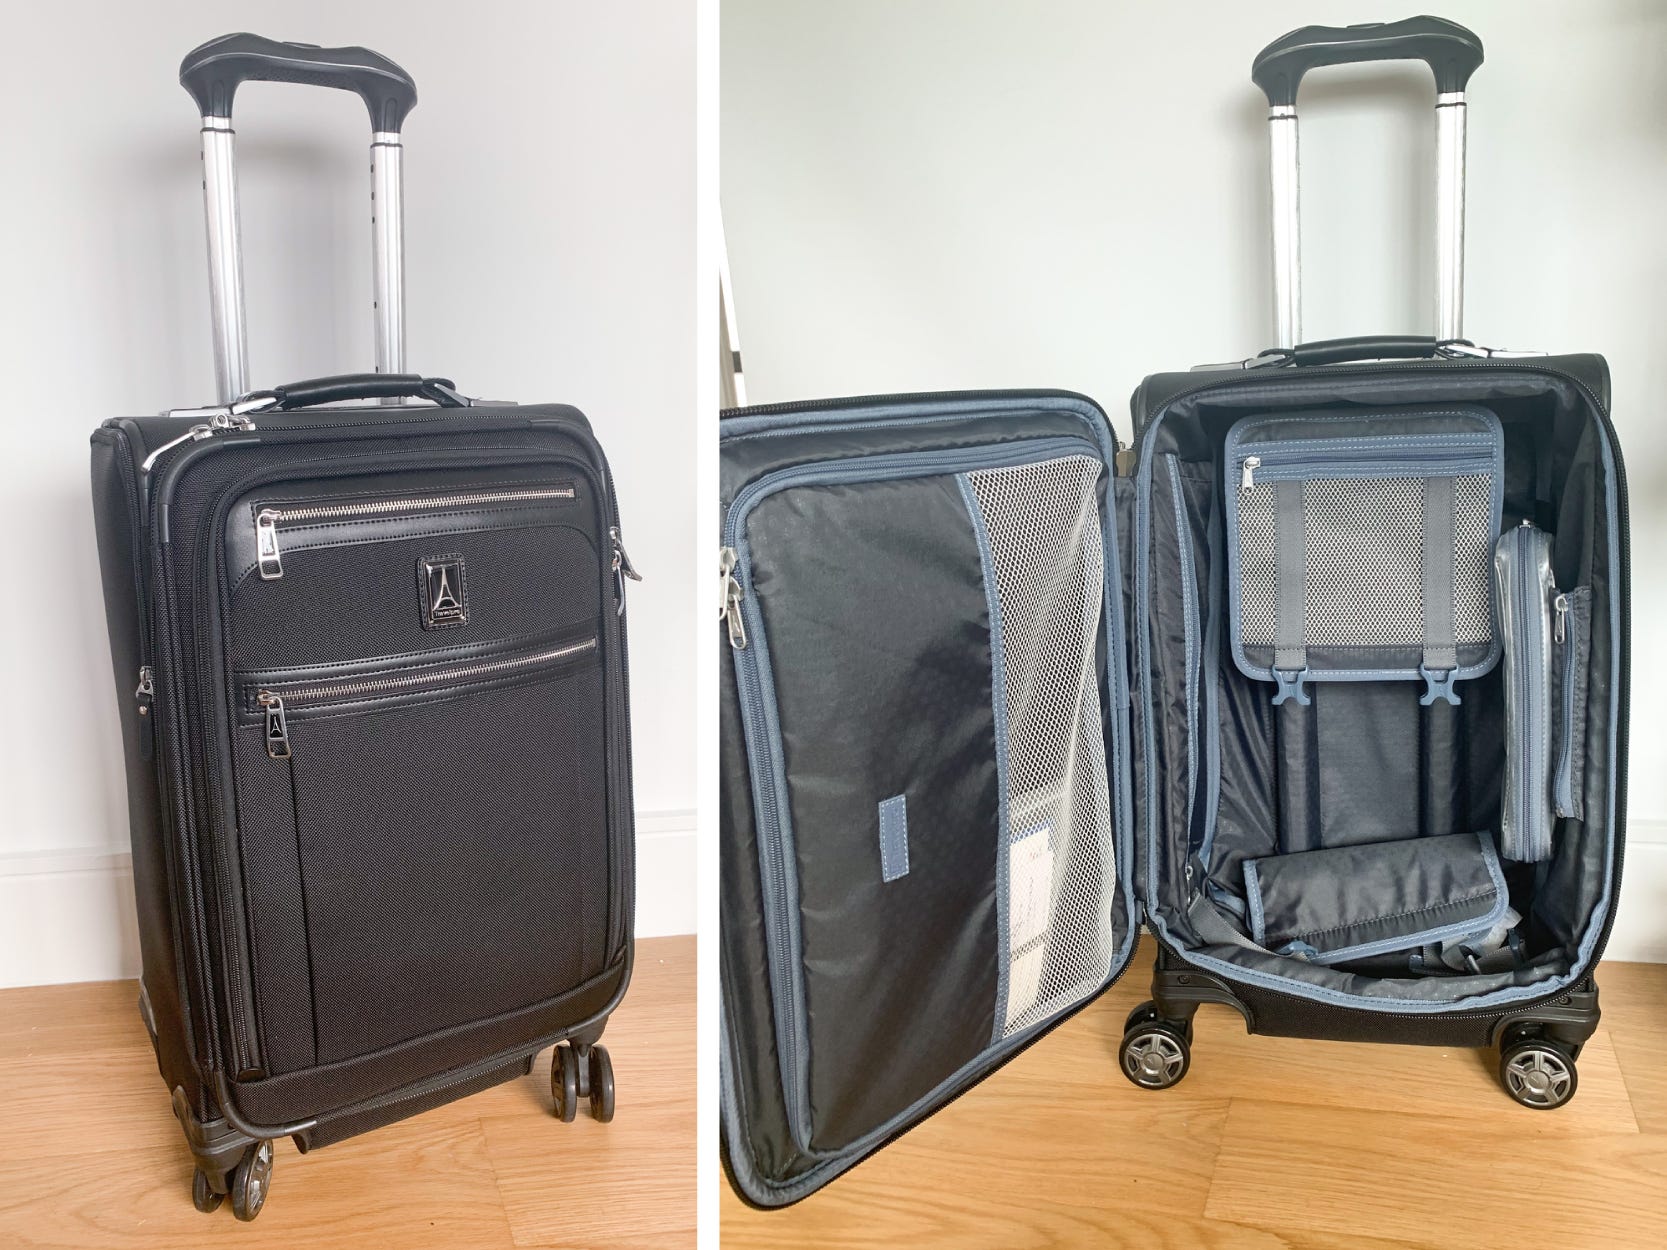 Best carry-on luggage - travelpro side by side